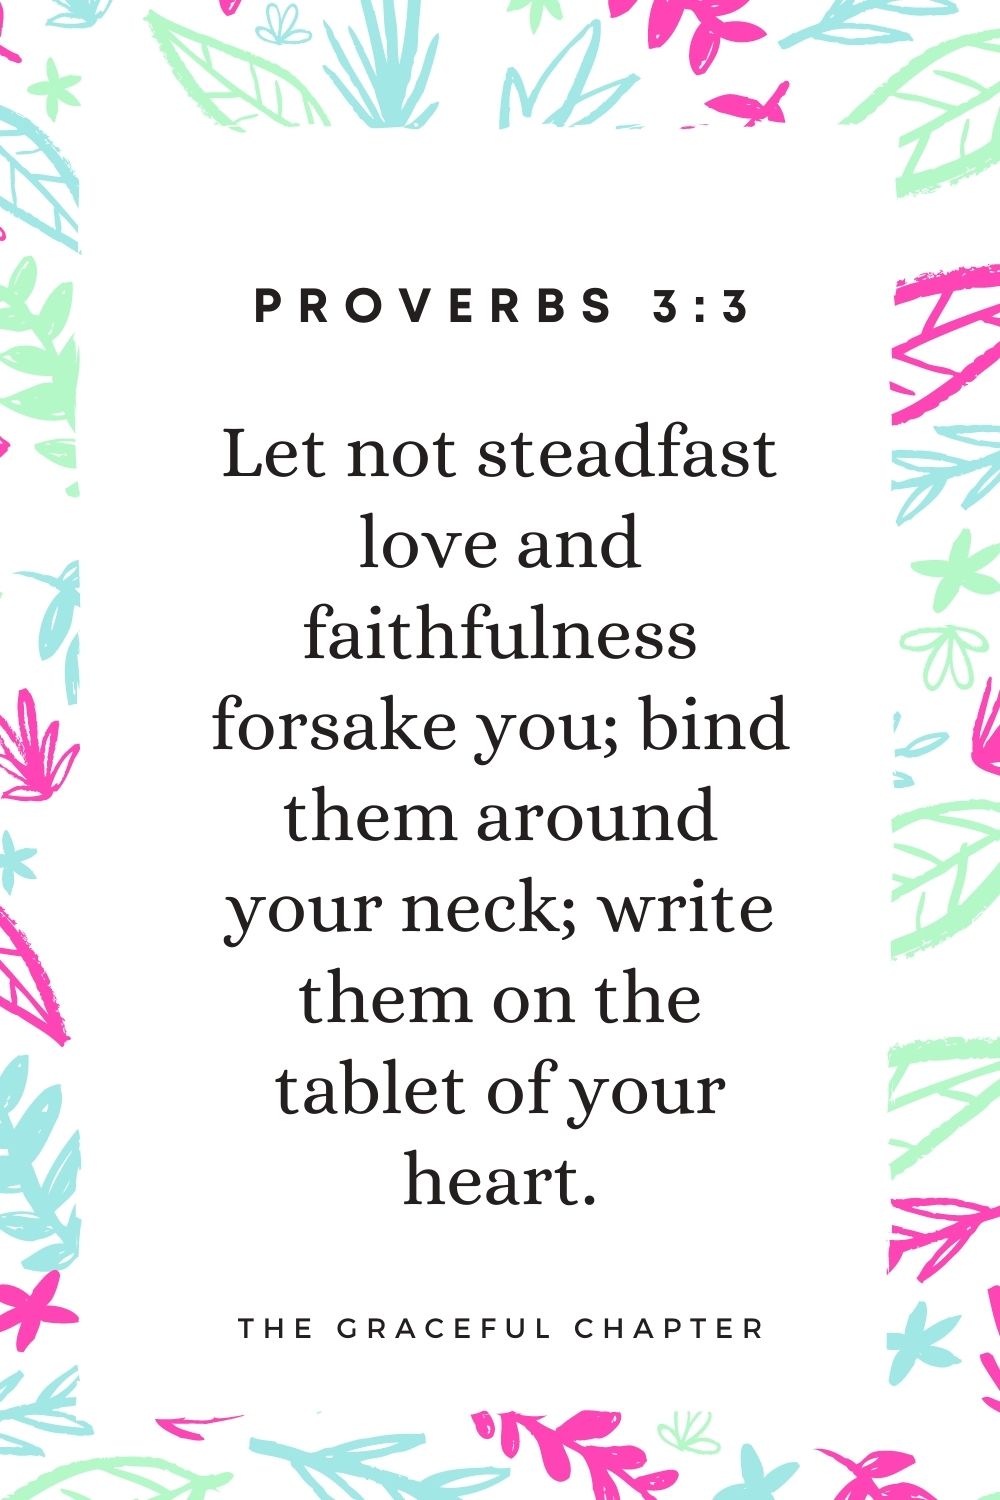 Let not steadfast love and faithfulness forsake you; bind them around your neck; write them on the tablet of your heart. Proverbs 3:3